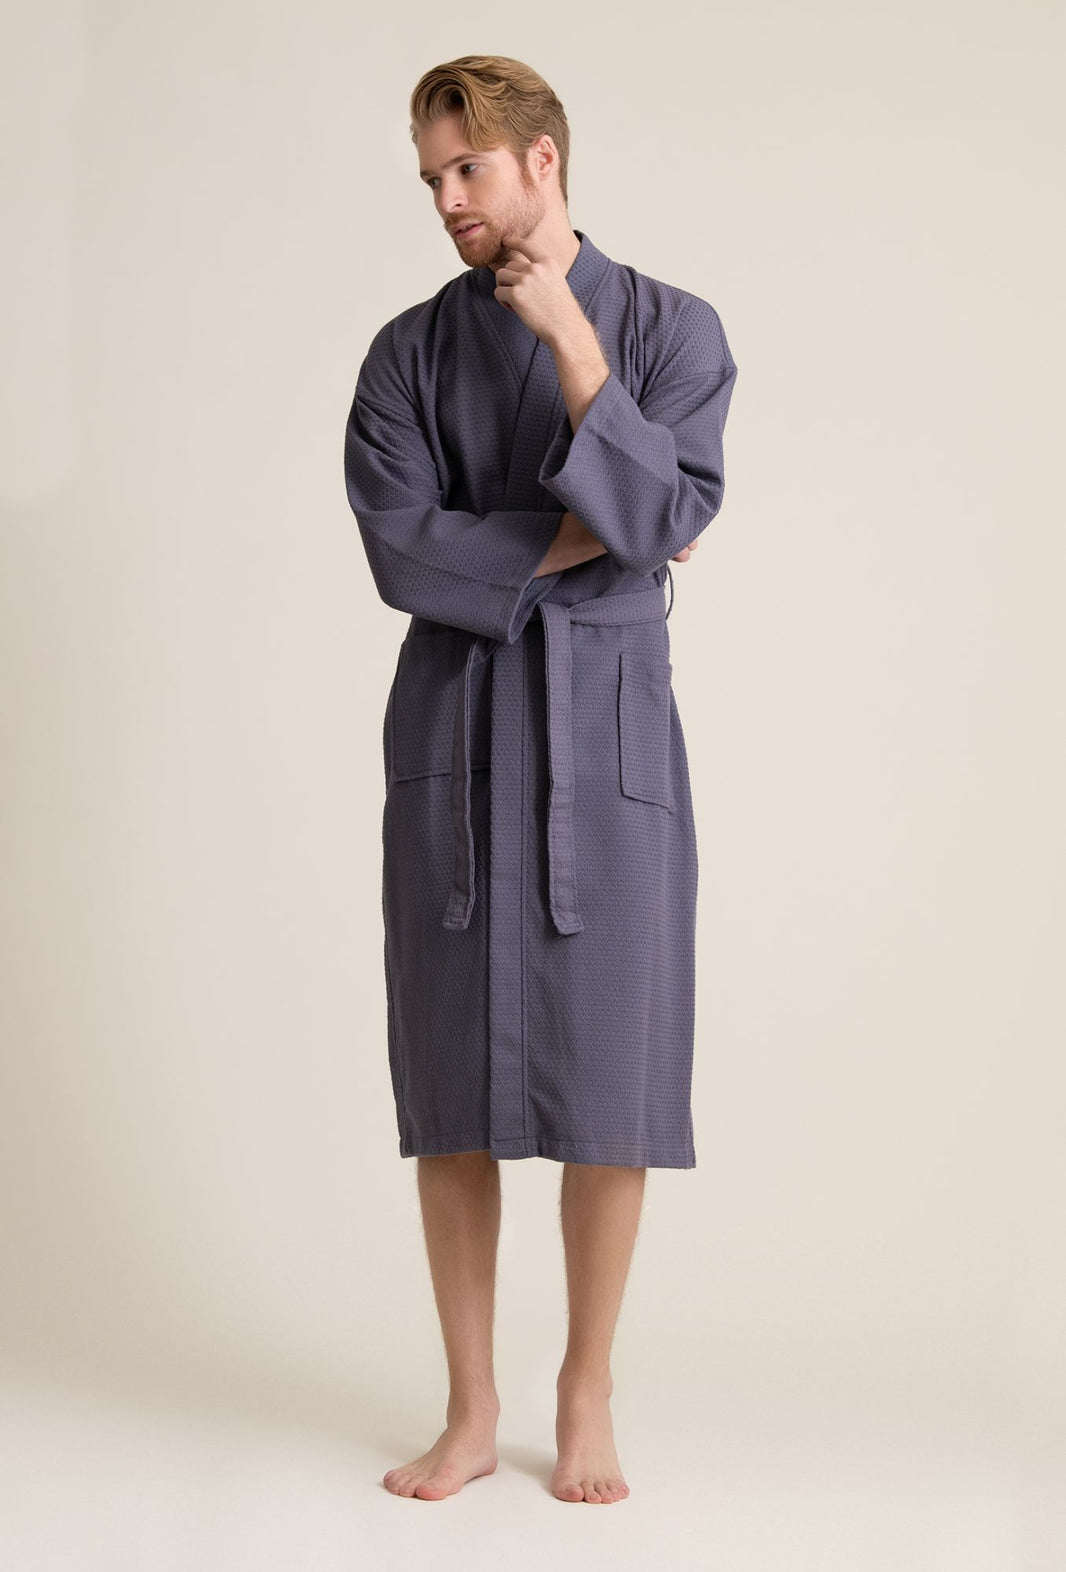 Luxury Highest Quality Bathrobes at Affordable Price – towelnrobe